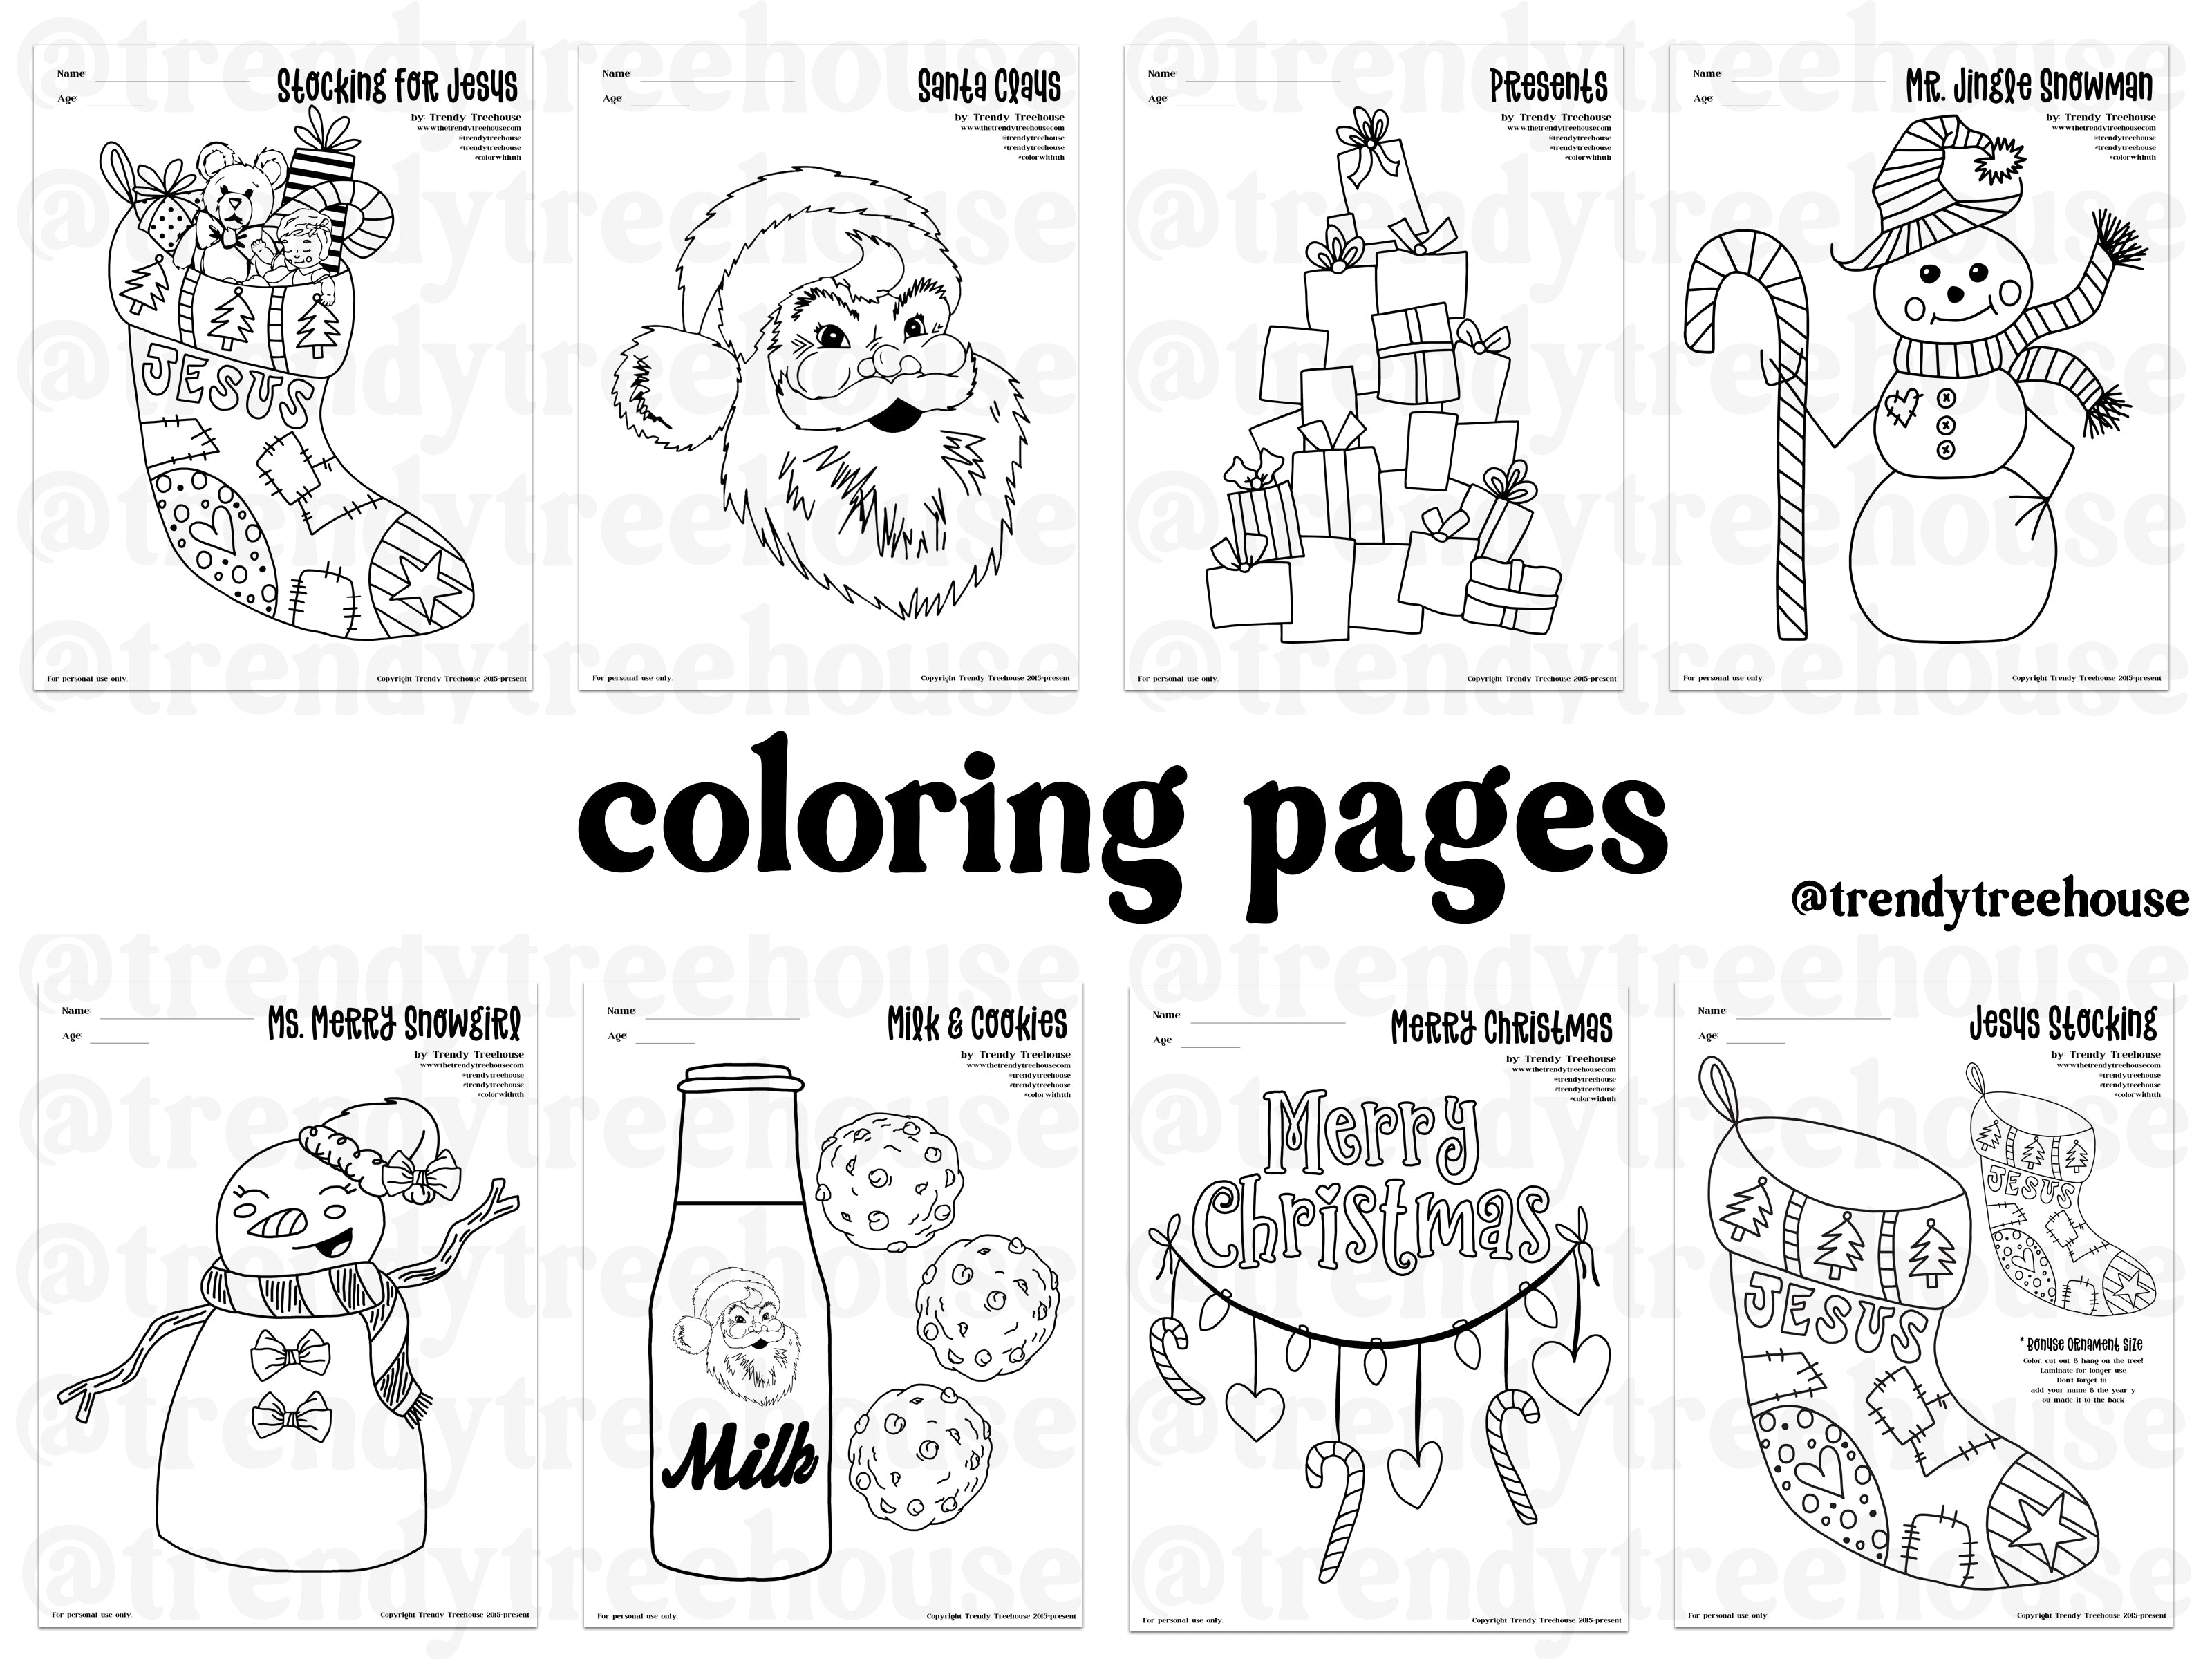 Christmas color pages â trendy treehouse